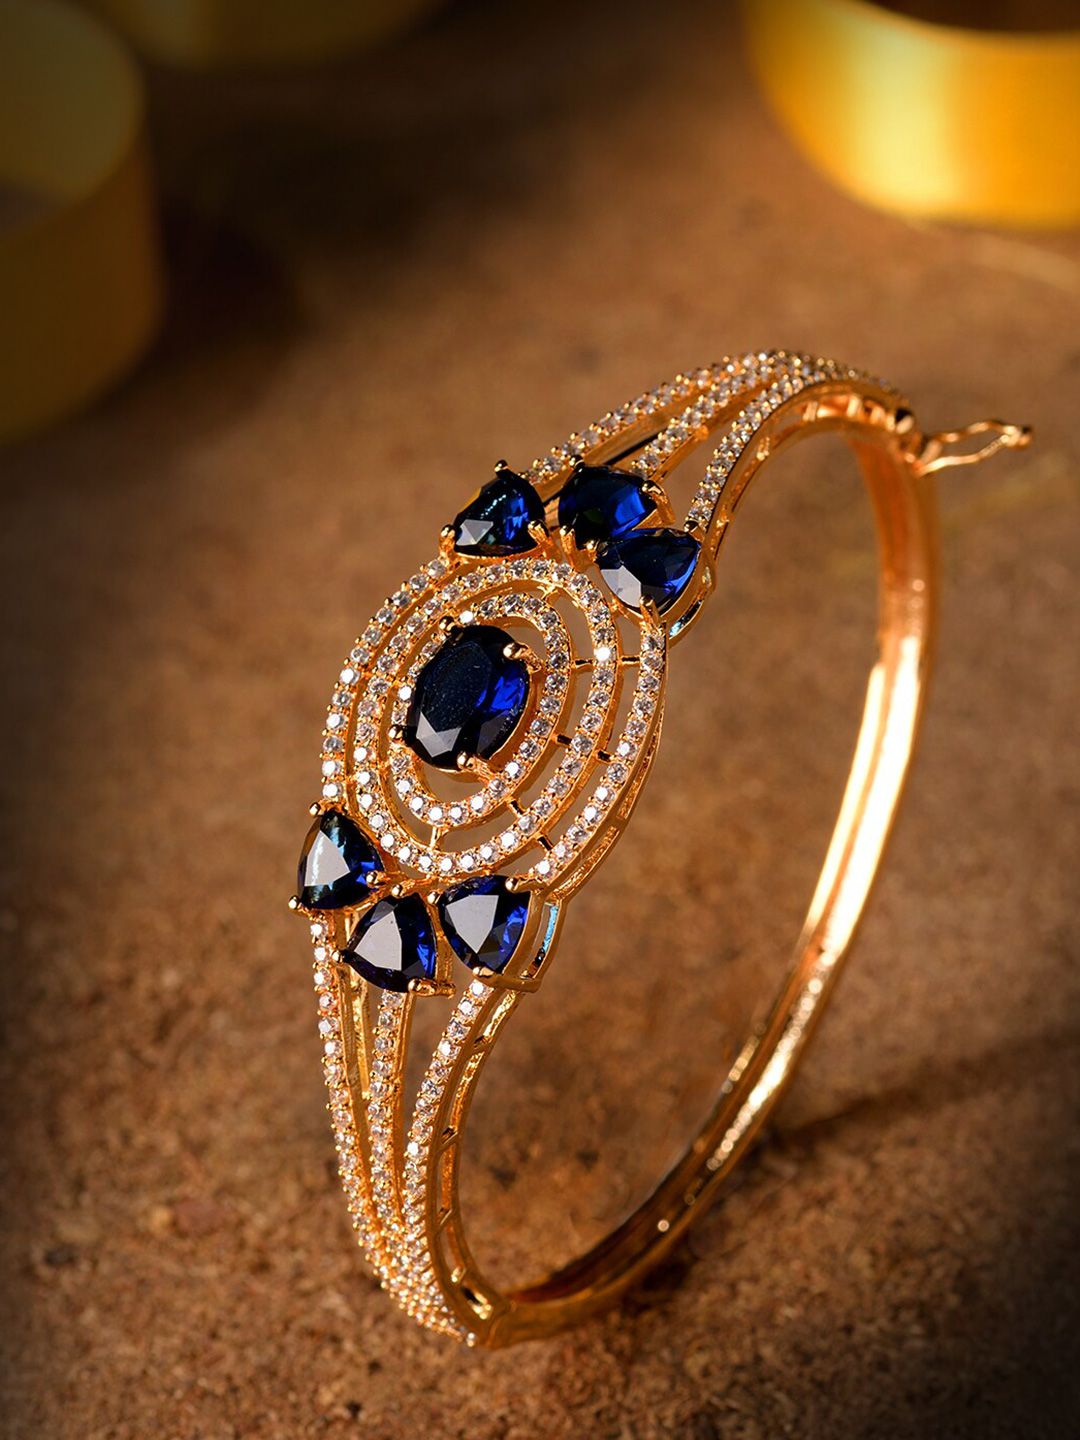 Saraf RS Jewellery Gold-Toned American Diamond Blue Stone Studded Handcrafted Bracelet Price in India